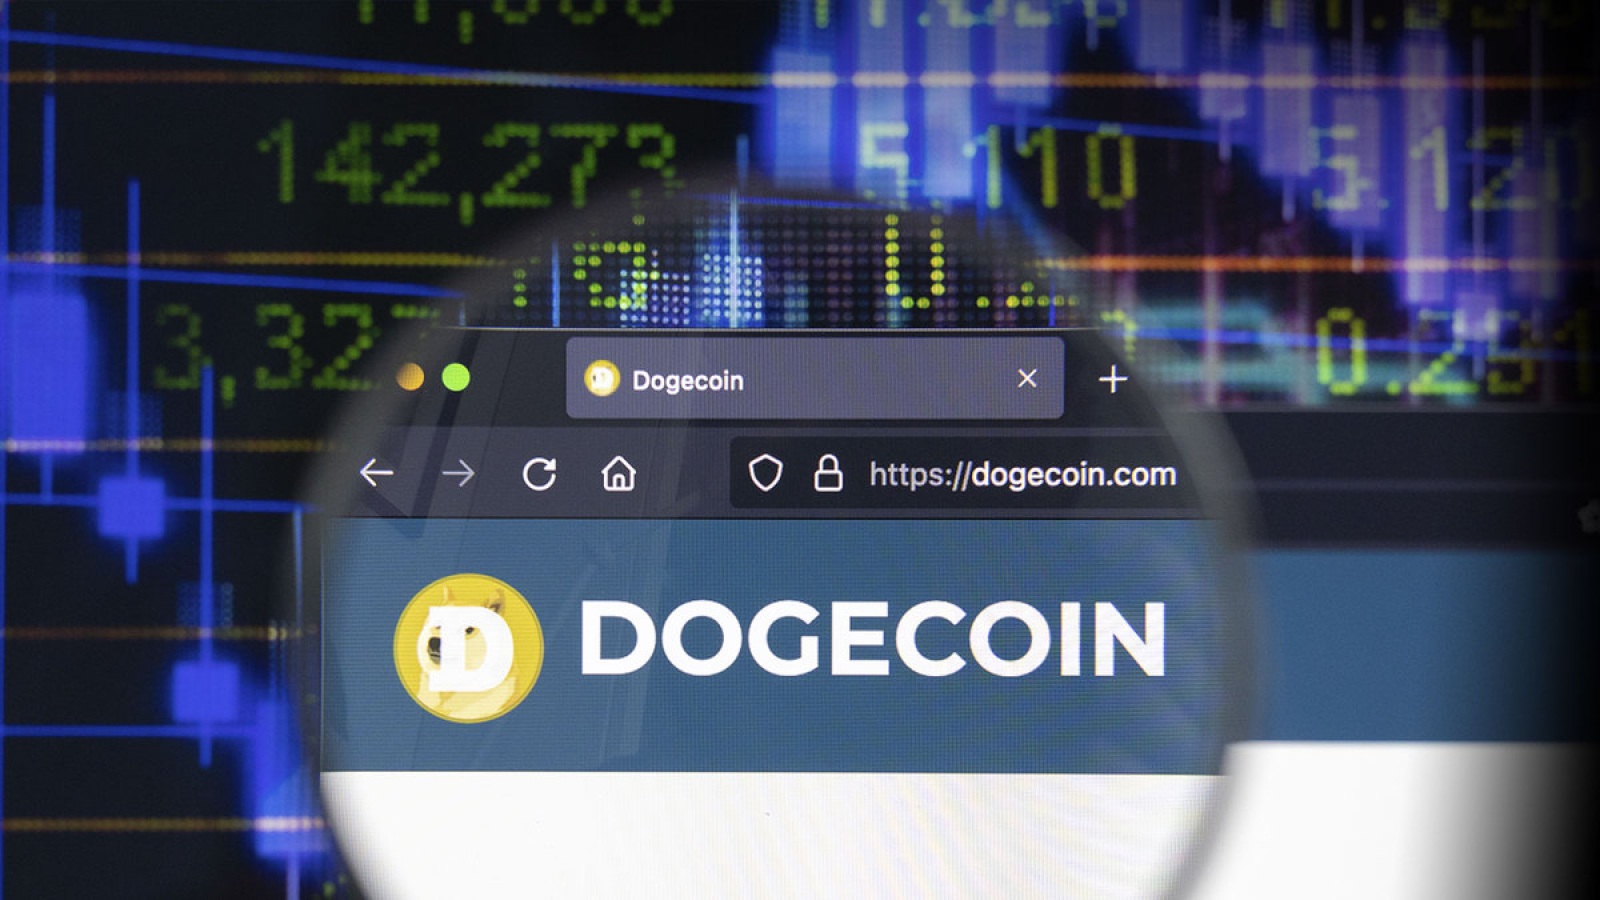 $2 Billion in DOGE Held by Robinhood Now After Big Decline in Its Dogecoin Supply